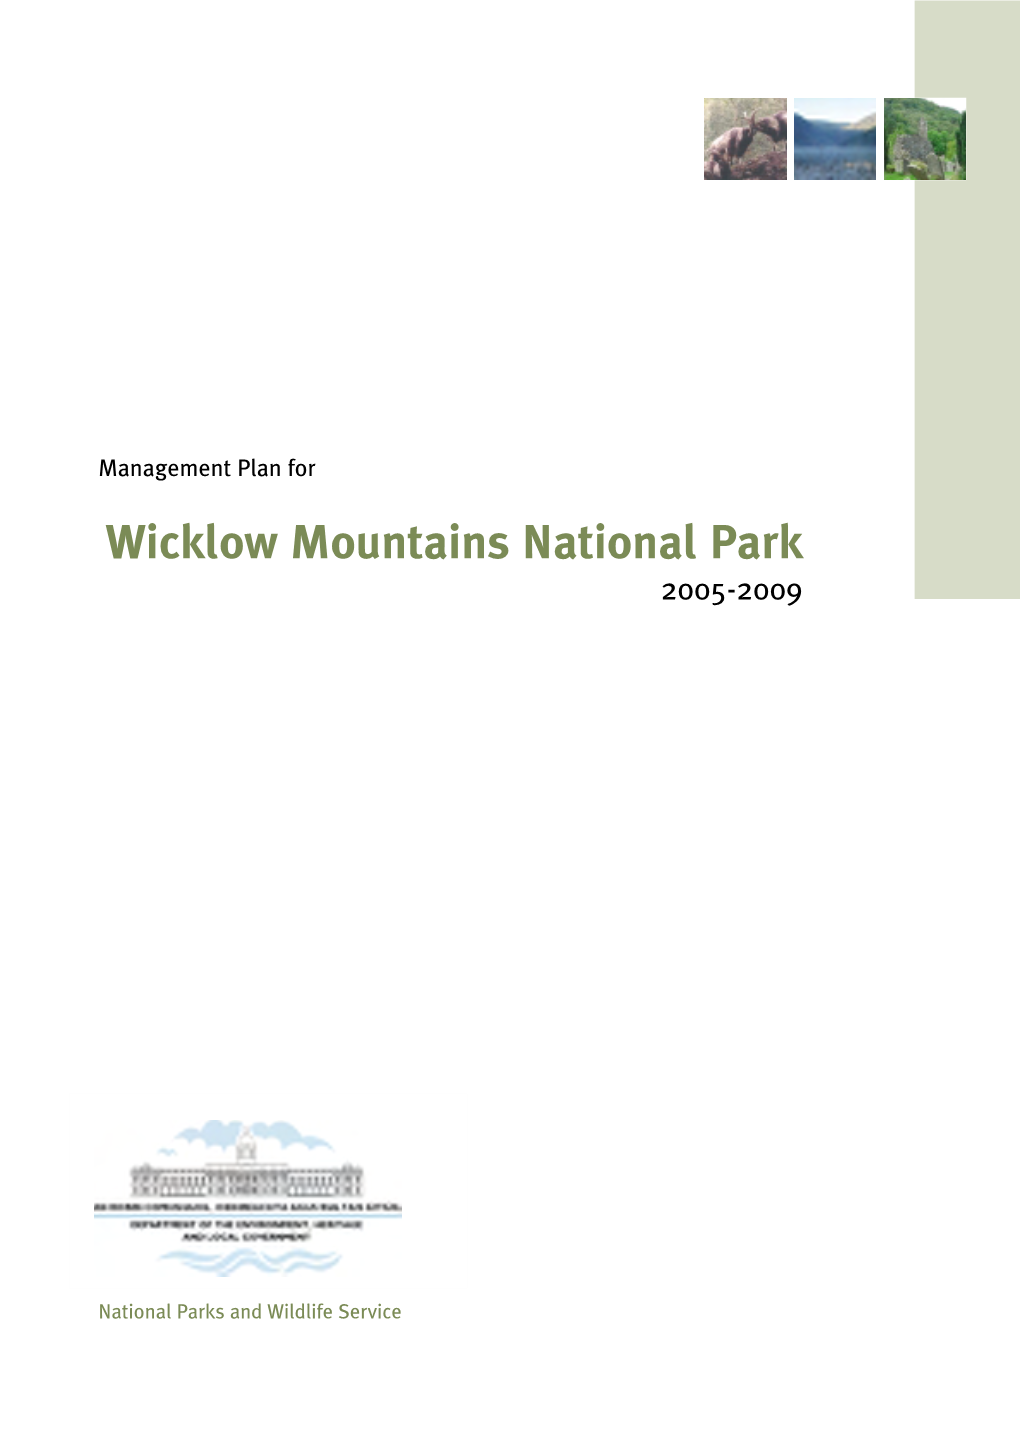 Wicklow Mountains National Park Management Plan